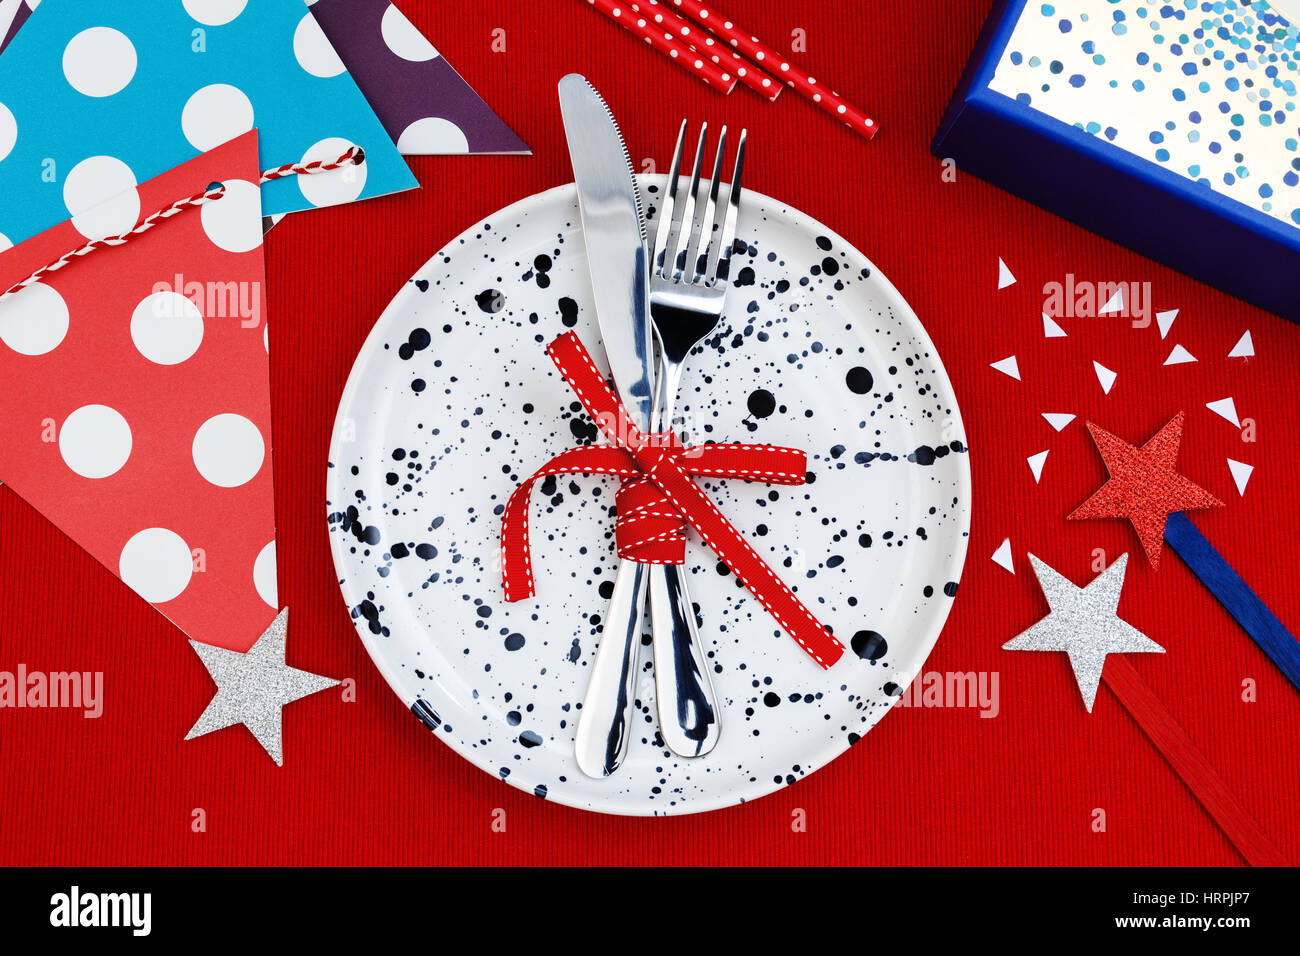 Party and celebration table setting with gift box on red tablecloth background Stock Photo